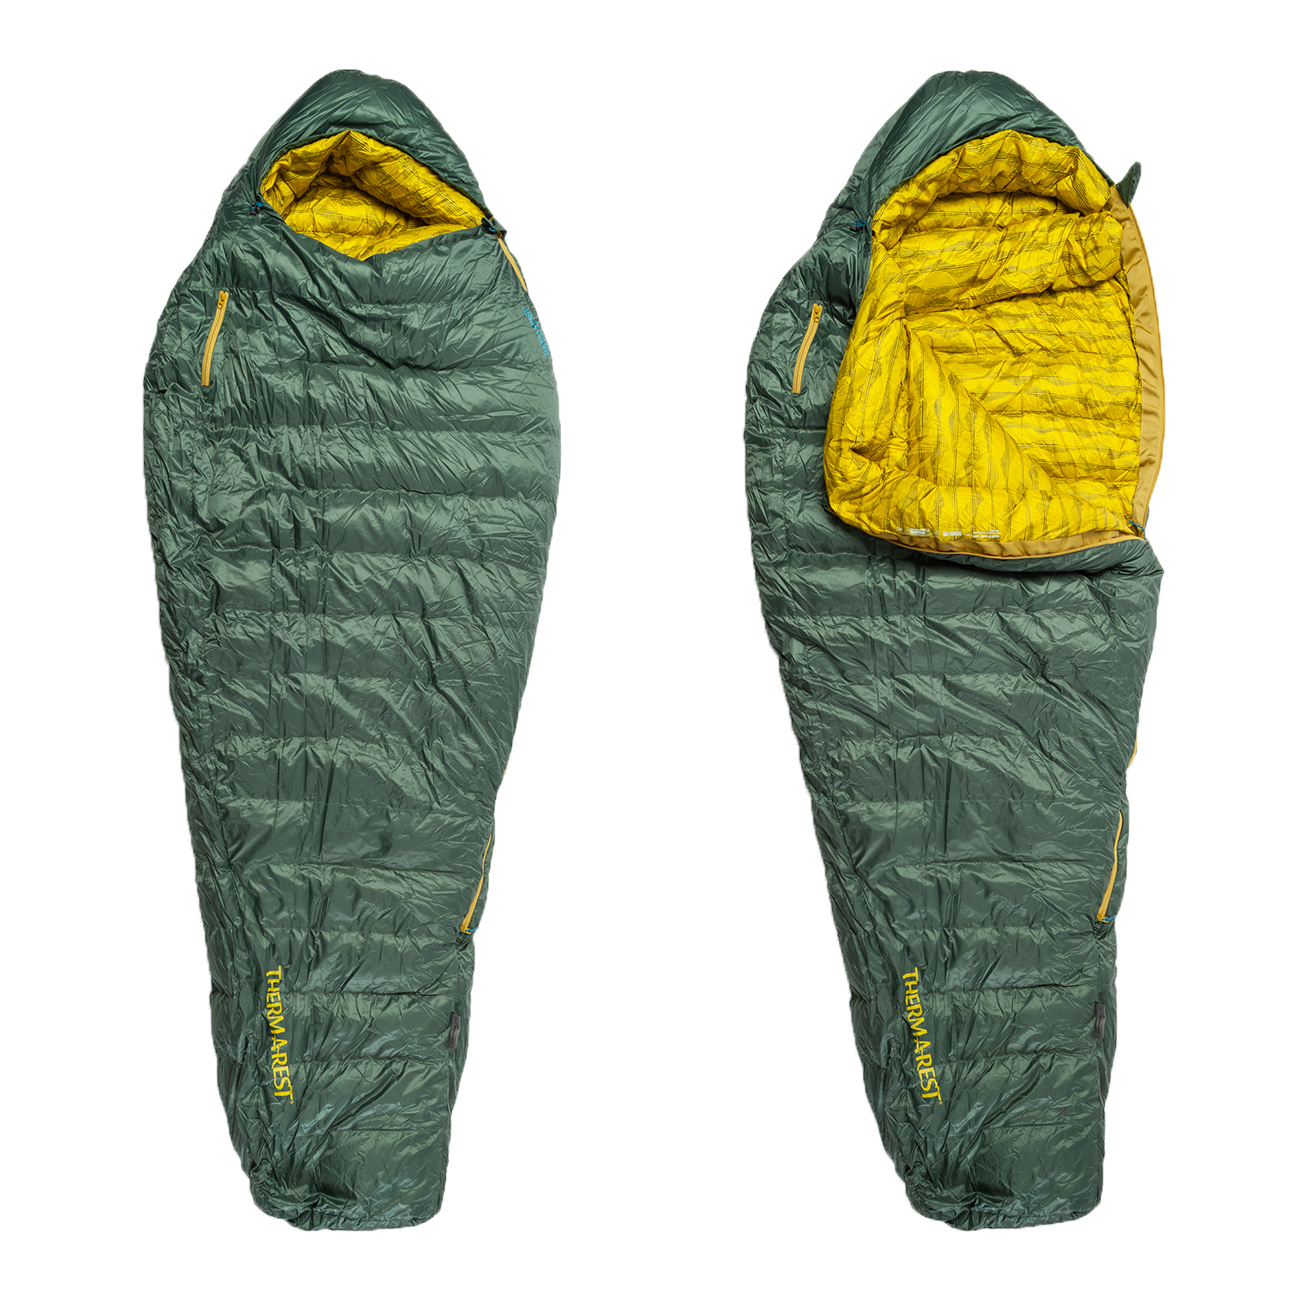 The Ultimate Sleeping Bag Review: Nine of the best three-season bags on ...